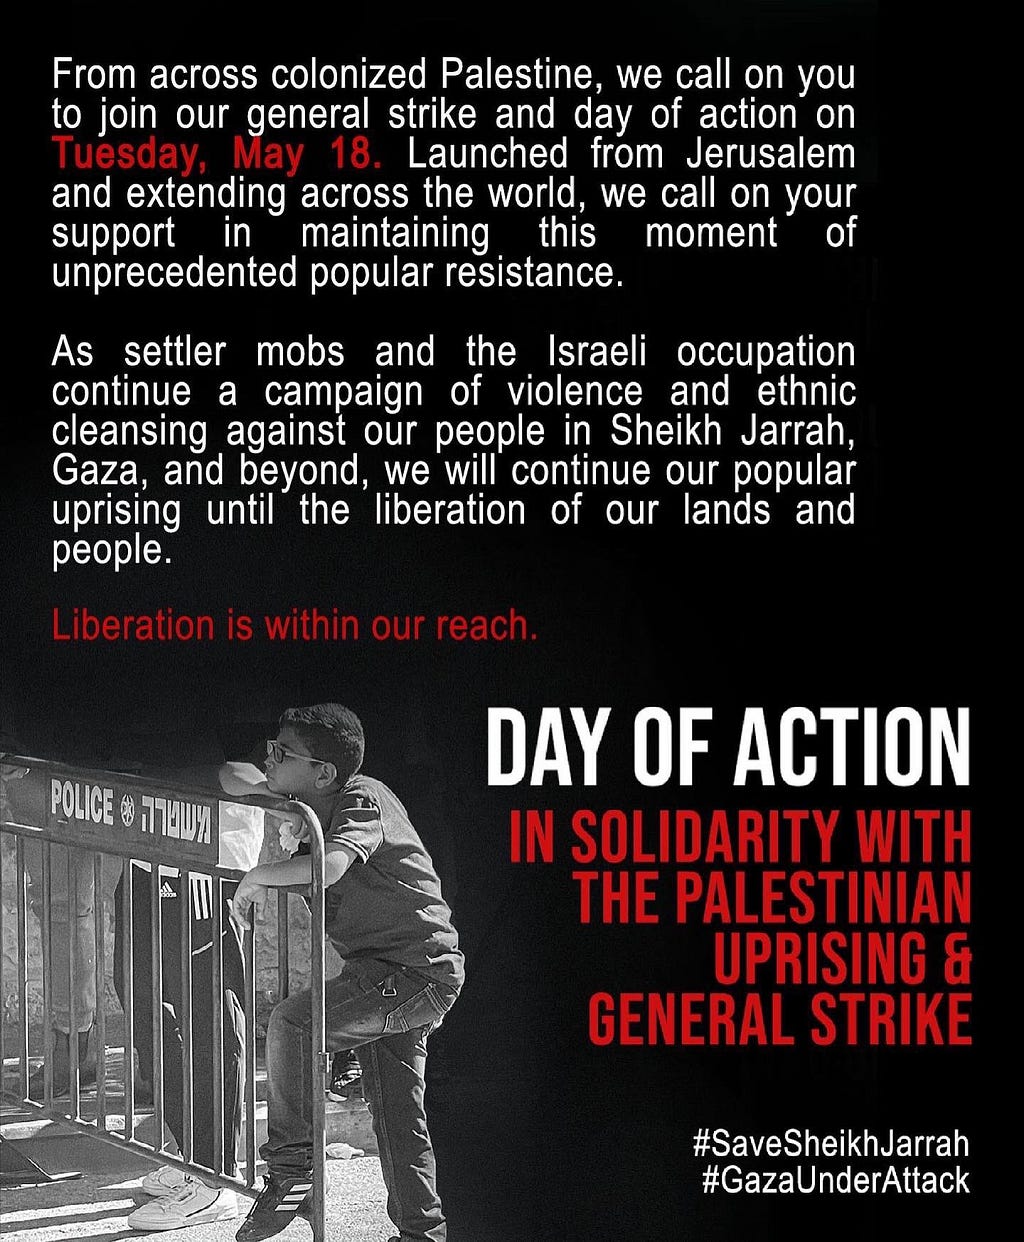 Meme with black background with boy leaning against a police barricade and with writing in white and red lettering that reads: “From across colonized Palestine, we call on you to join pur general strike and day of action on Tuesday May 18. Launched from Jerusalem and extending across the world, we call on your support in maintaining this moment of unprecedented popular resistance.”